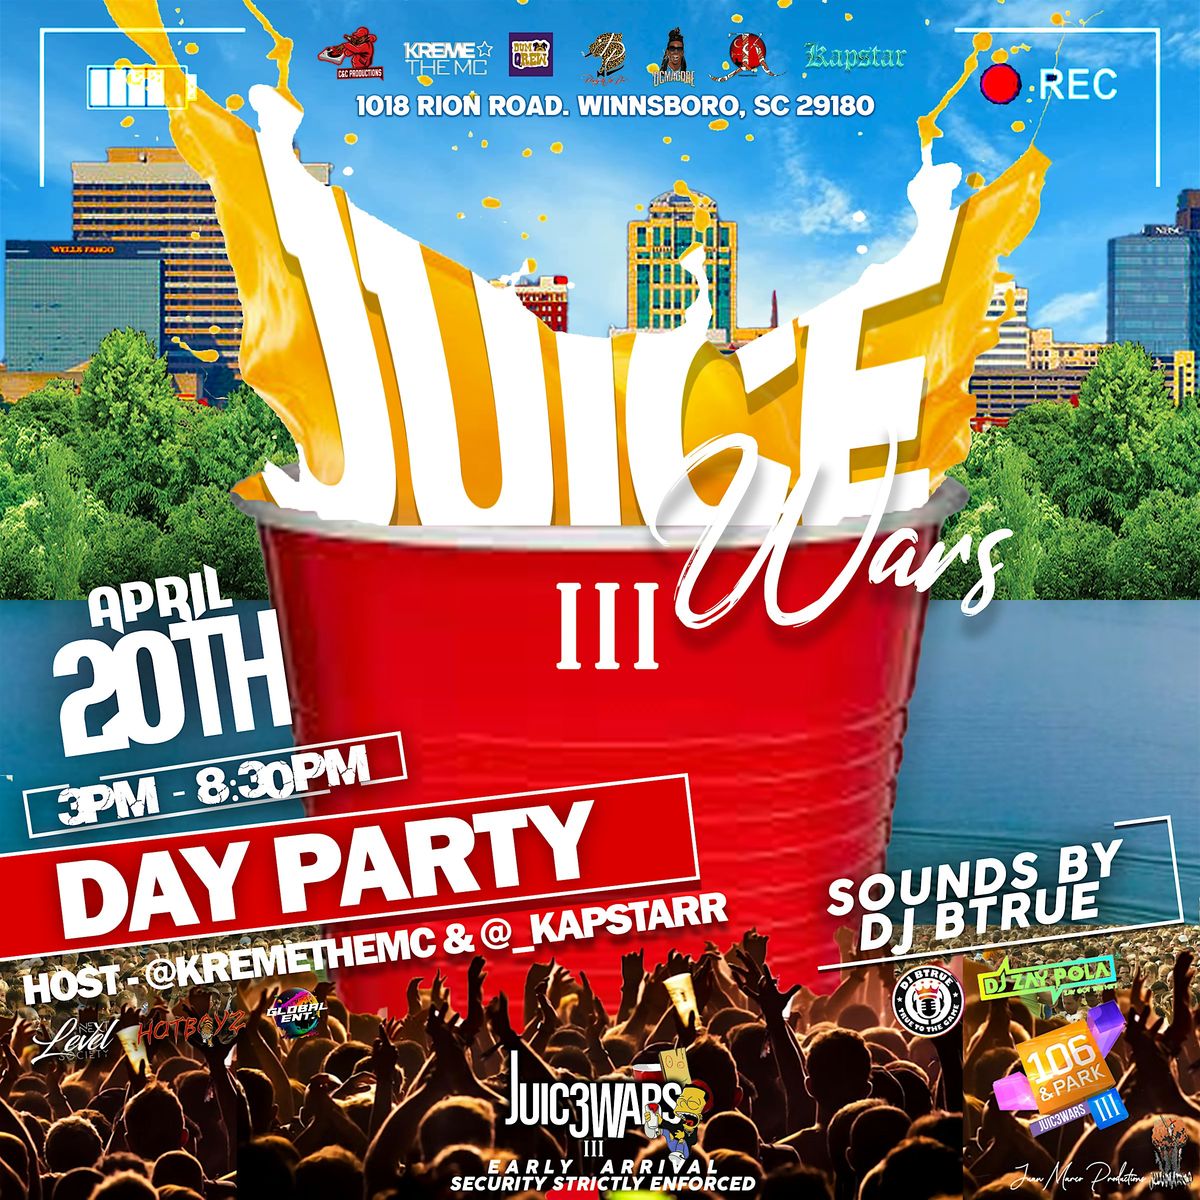 Juice Wars 3 Day party